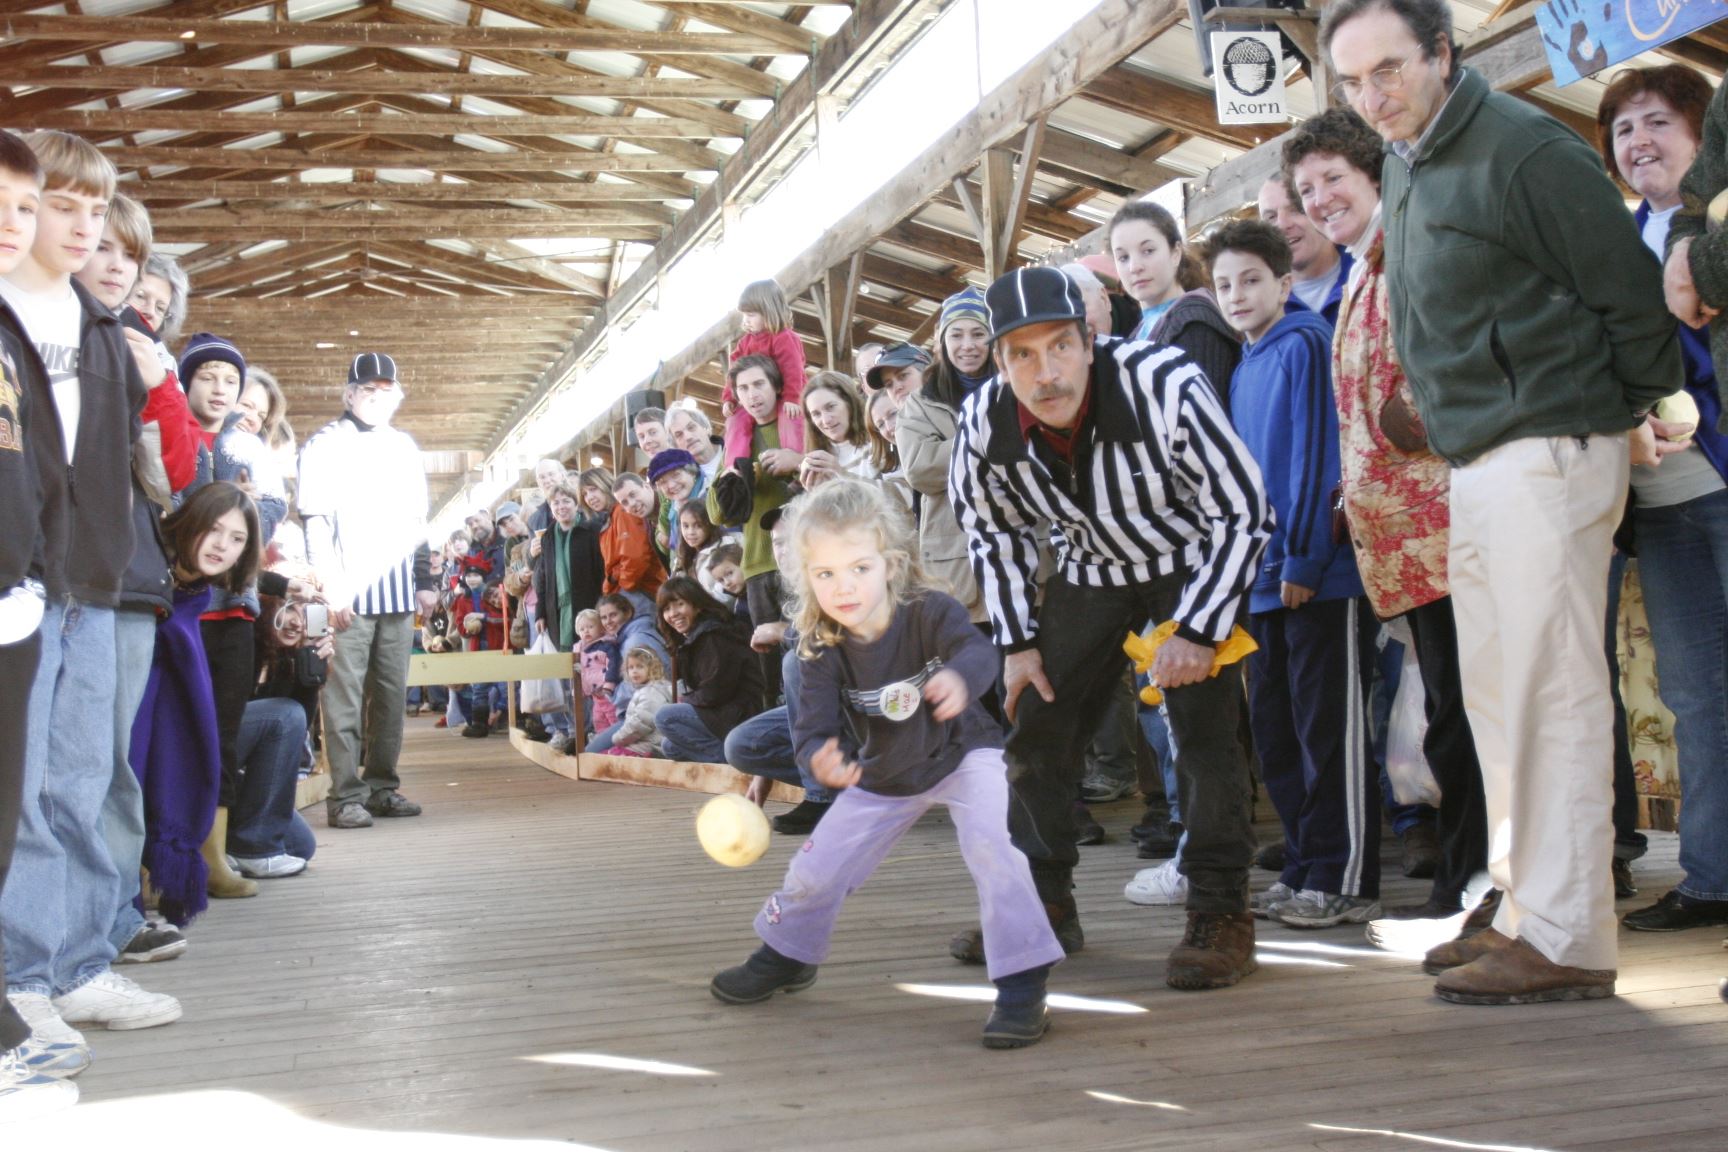 Image of a child curing a rutabaga down the farmers market with a referee and a crowd lining the path